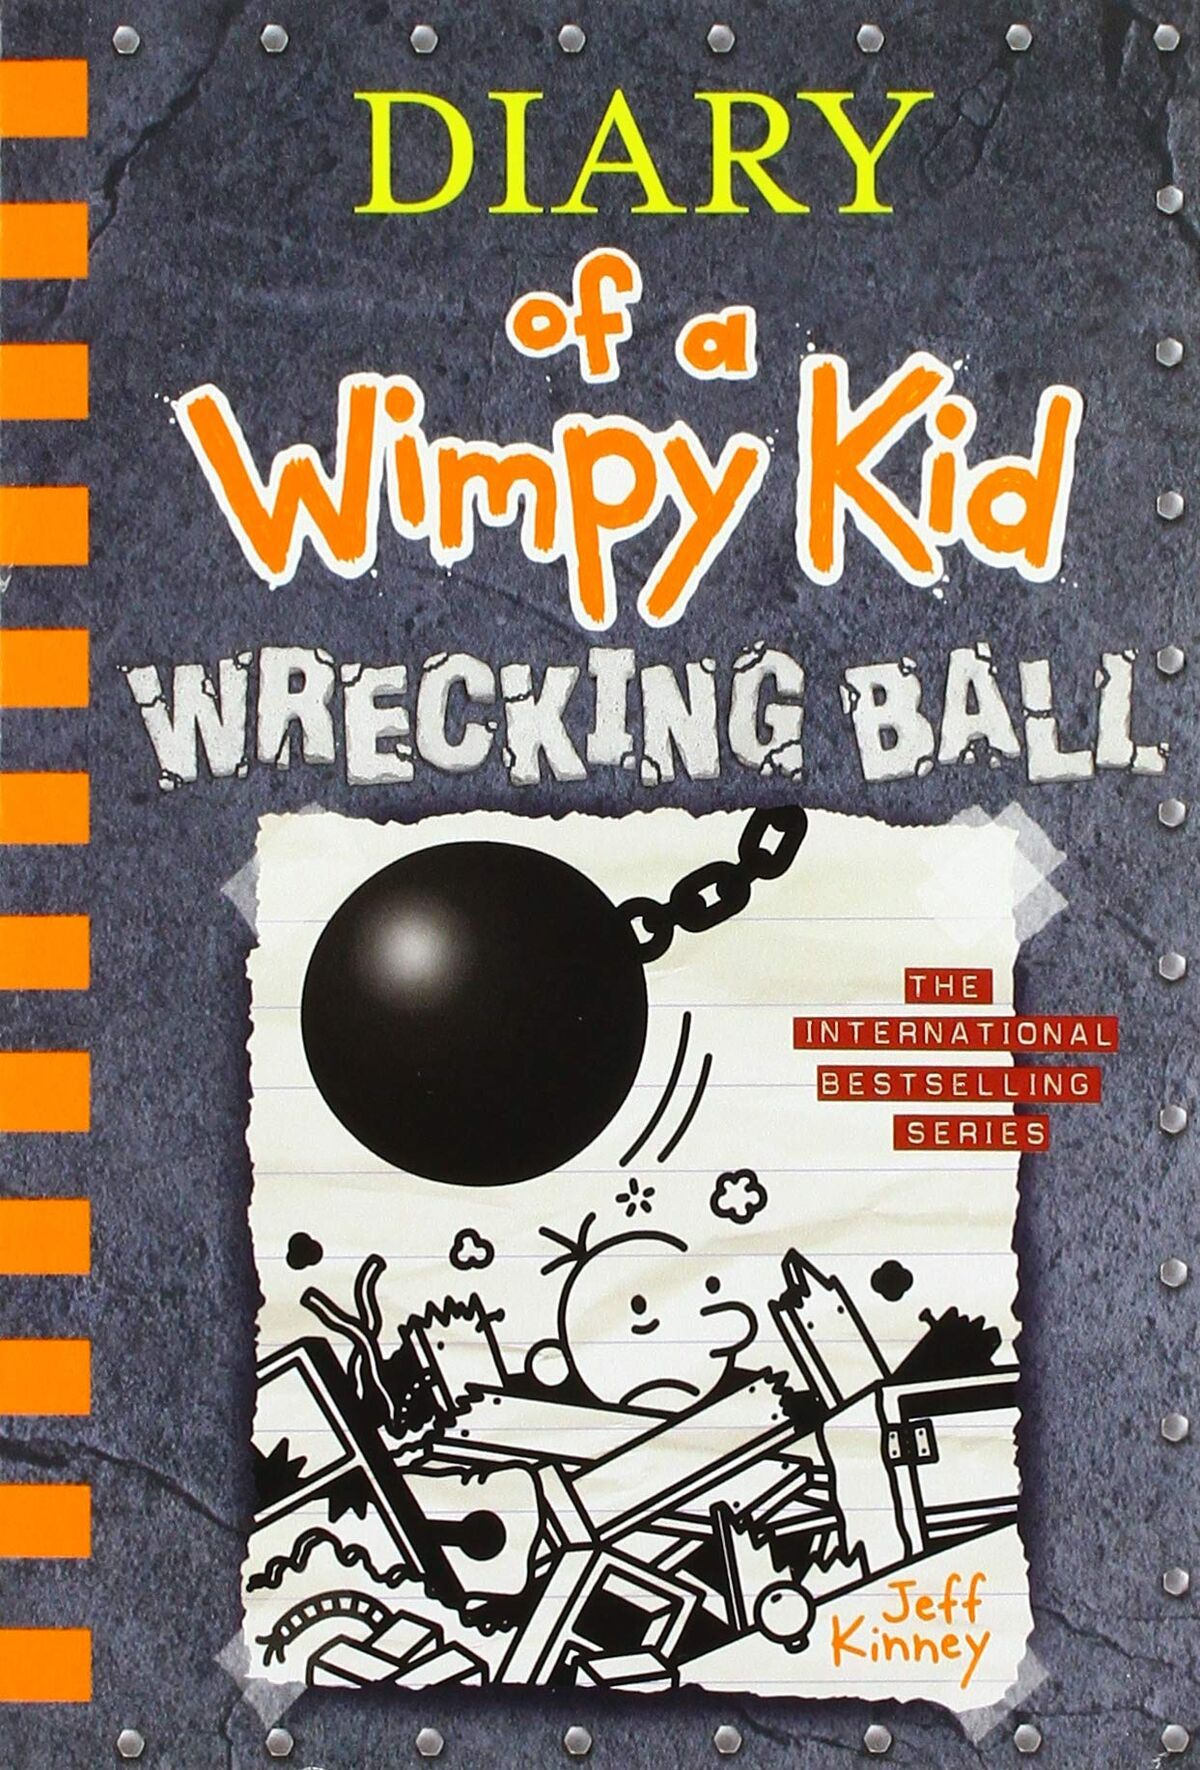 Diary of a Wimpy Kid: Wrecking Ball | Diary of a Wimpy Kid Wiki